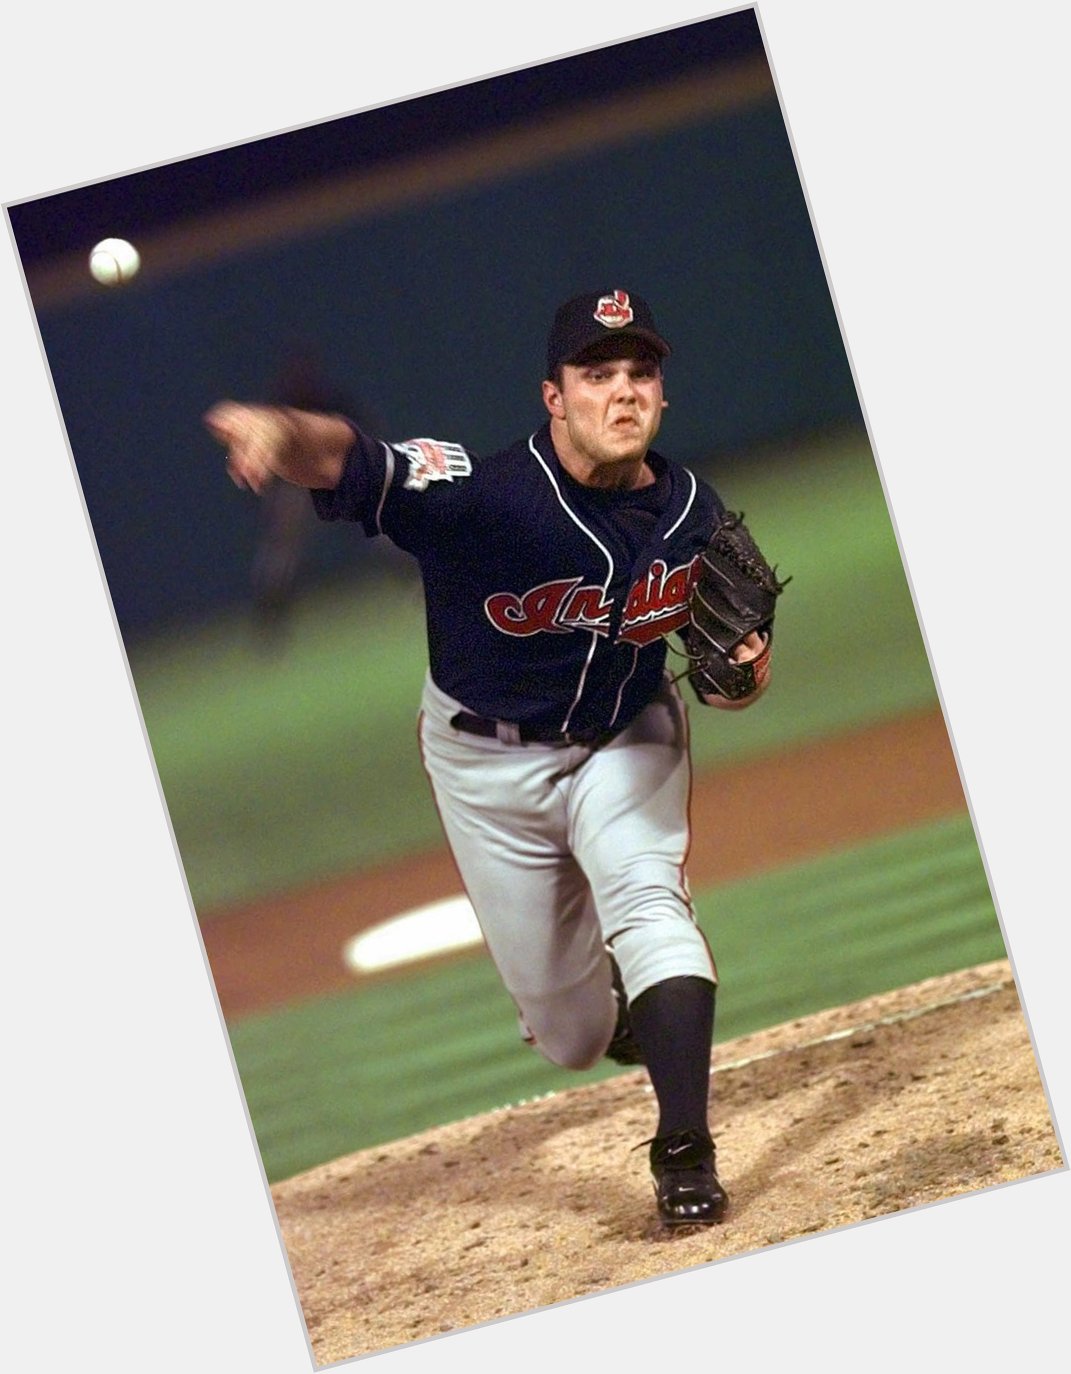 Happy birthday to Jaret Wright, who ALMOST became the Indians World Series hero in 1997 